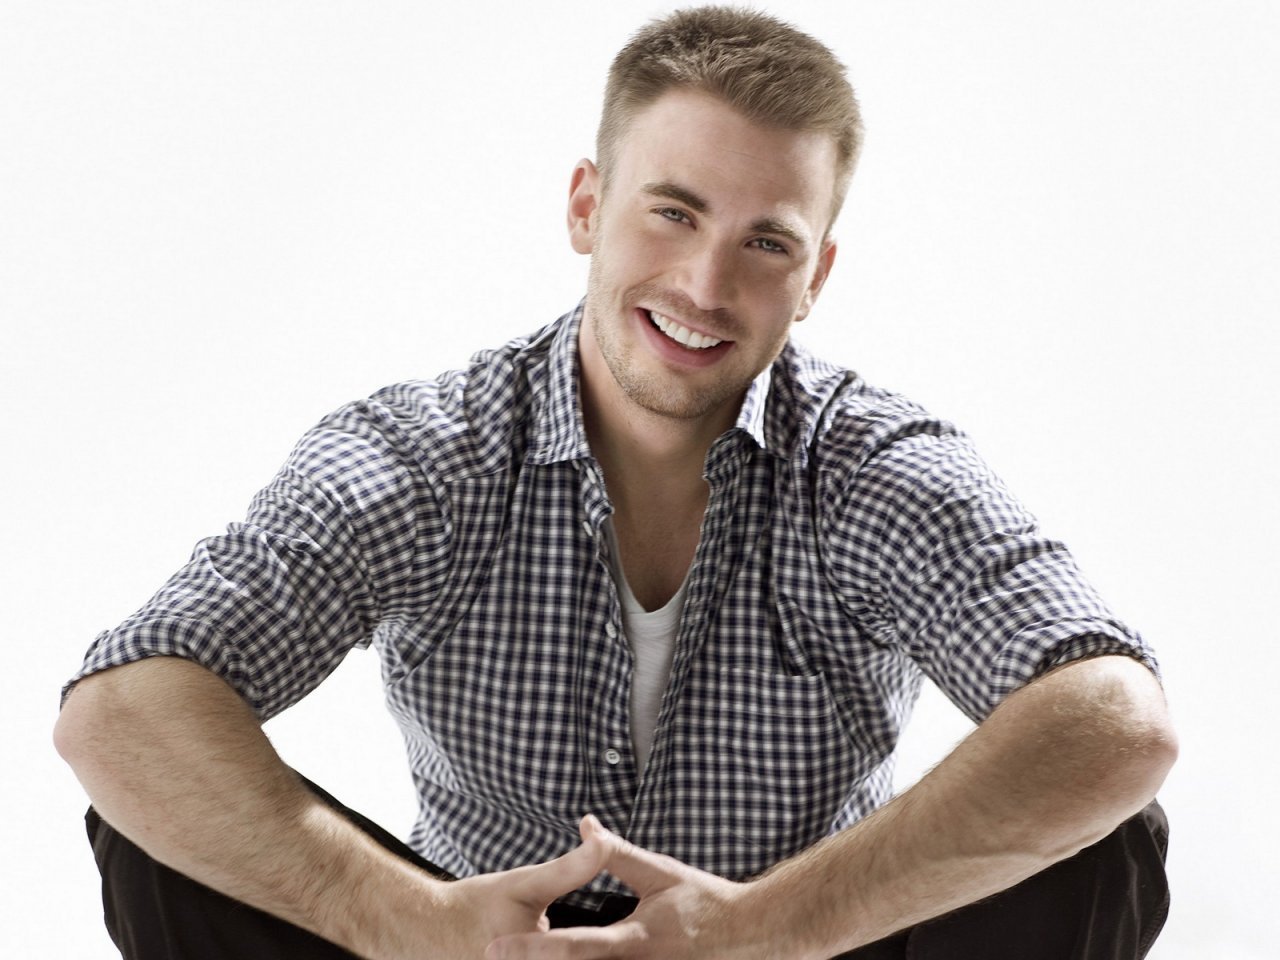 Chris Evans Actor Profile And New Photos 2012 Hollywood